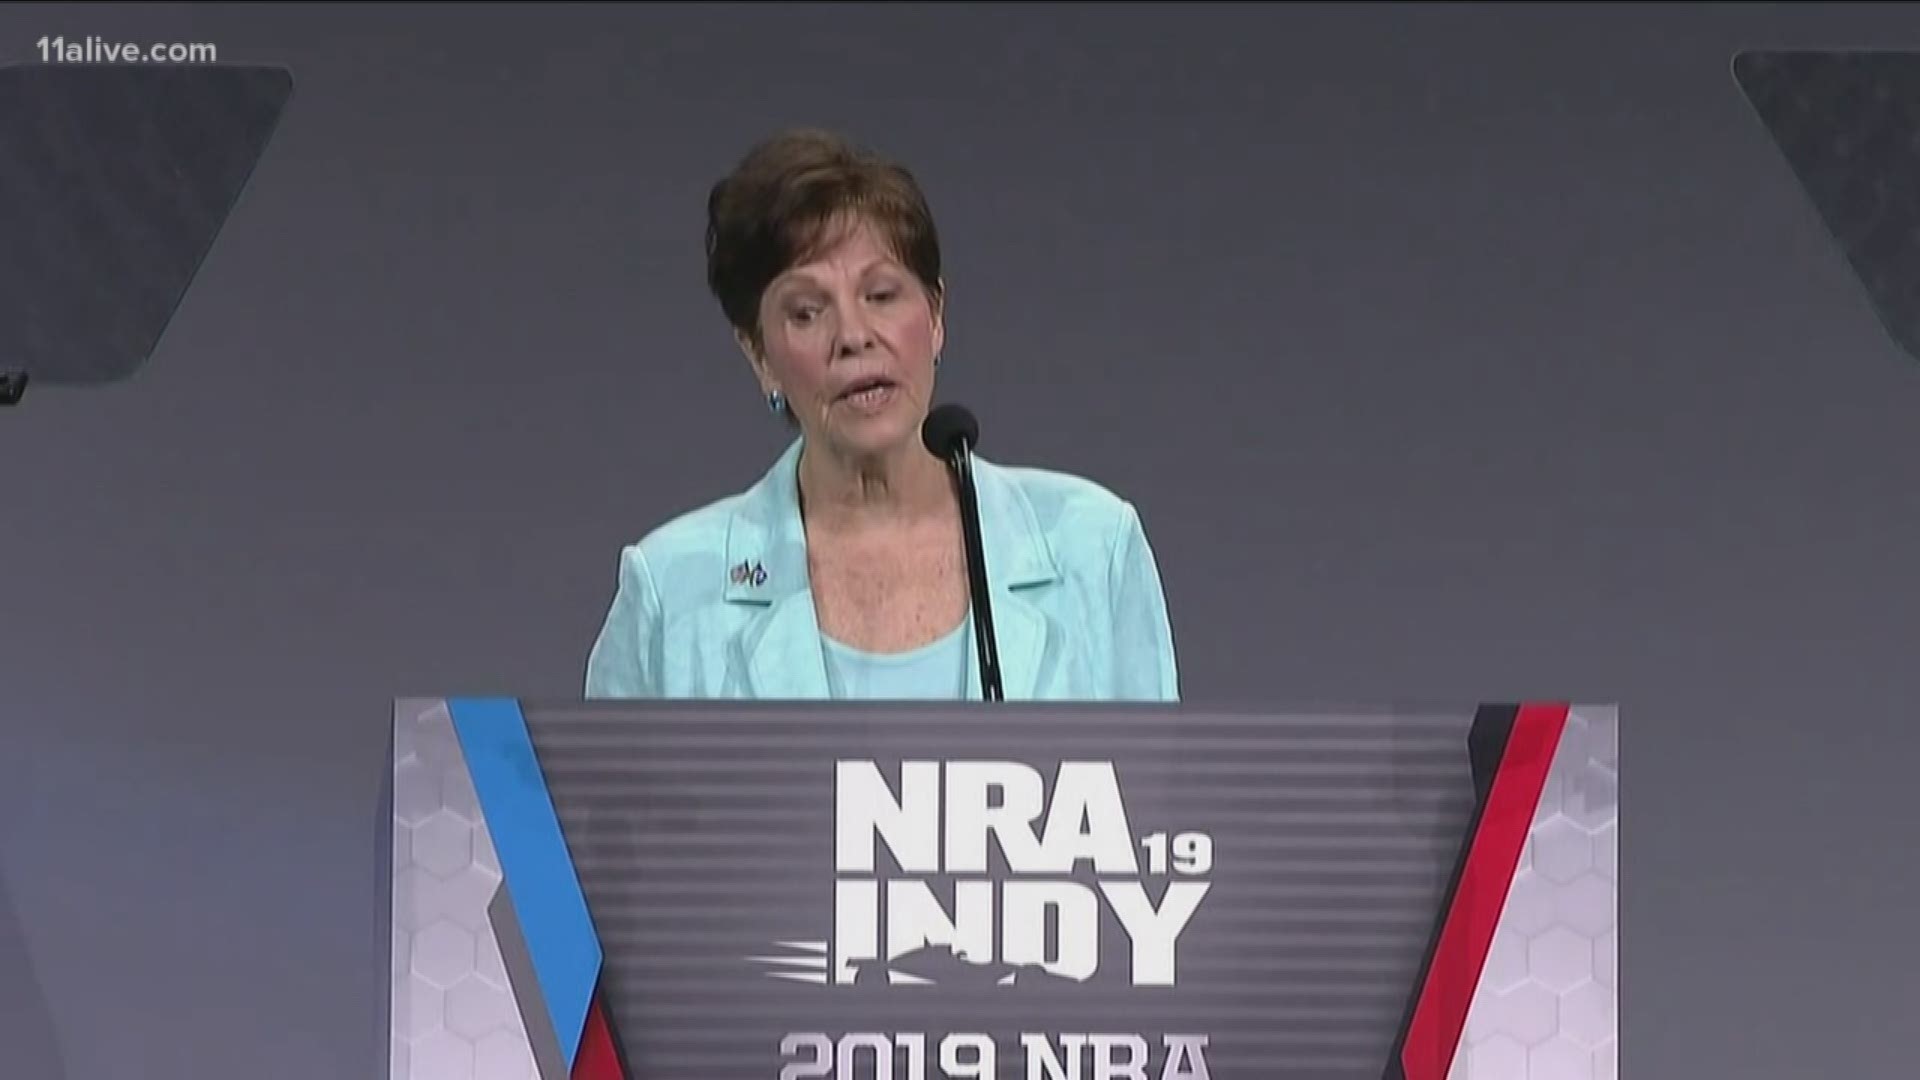 Carolyn Meadows was named the new president of the National Rifle Association on Monday.